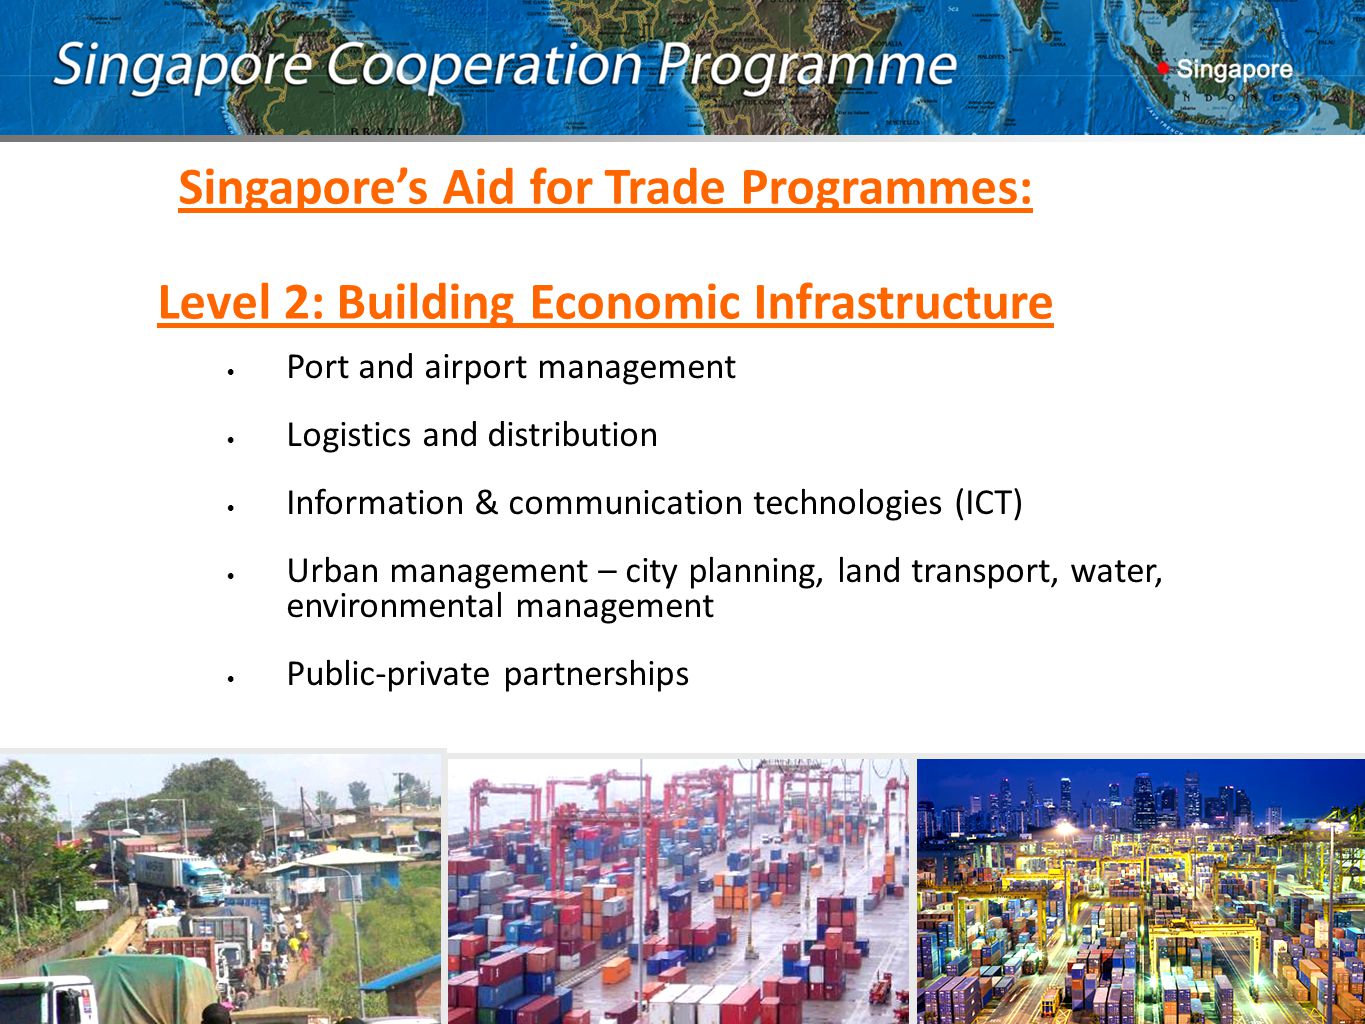 Port and airport management Logistics and distribution Information & communication technologies (ICT) Urban management – city planning, land transport, water, environmental management Public-private partnerships Singapore’s Aid for Trade Programmes: Level 2: Building Economic Infrastructure